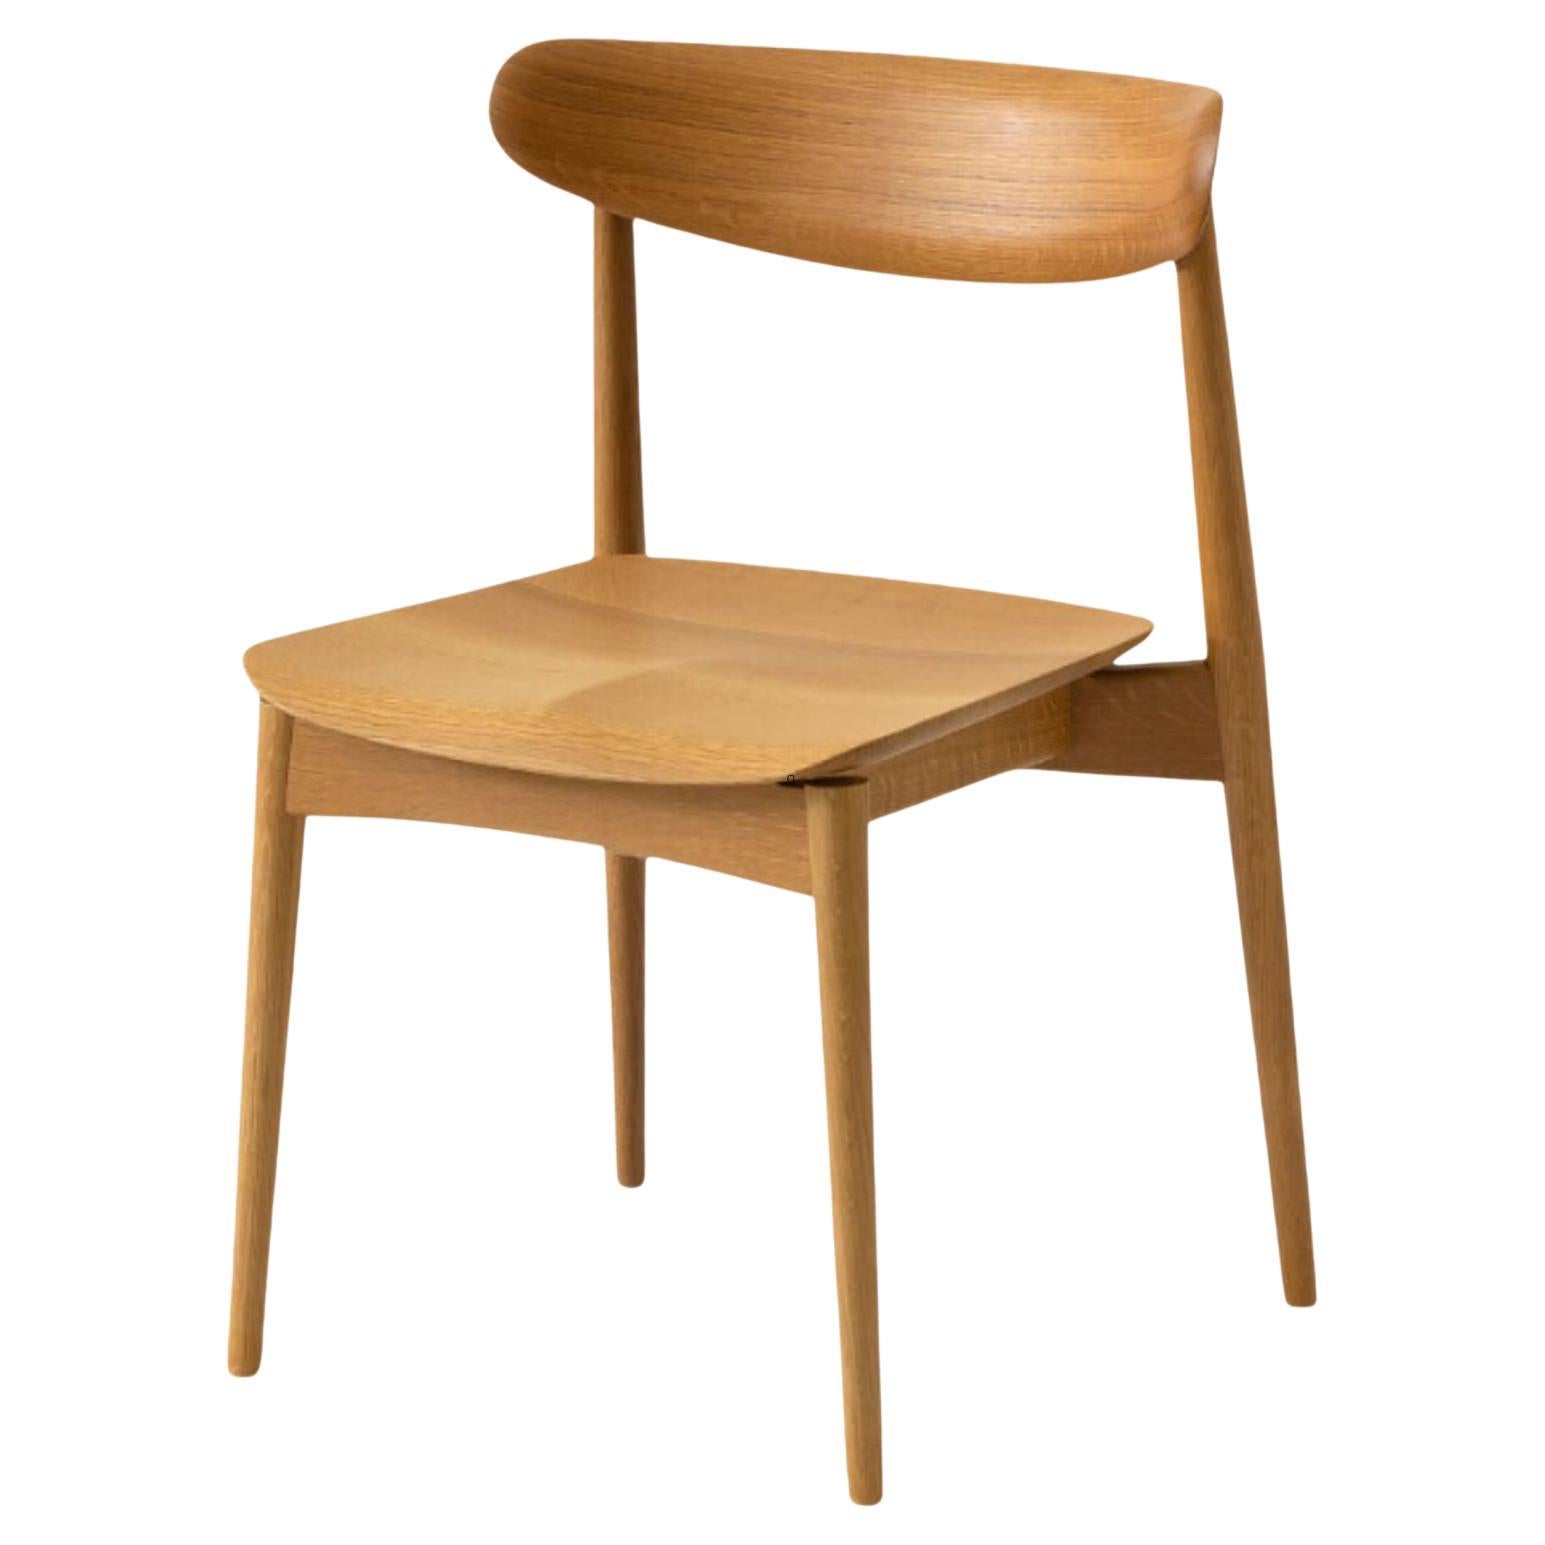 Motomi Kawakami 'Seoto KD201' Dining Chair in Oak and Upholstery for Hida For Sale 2